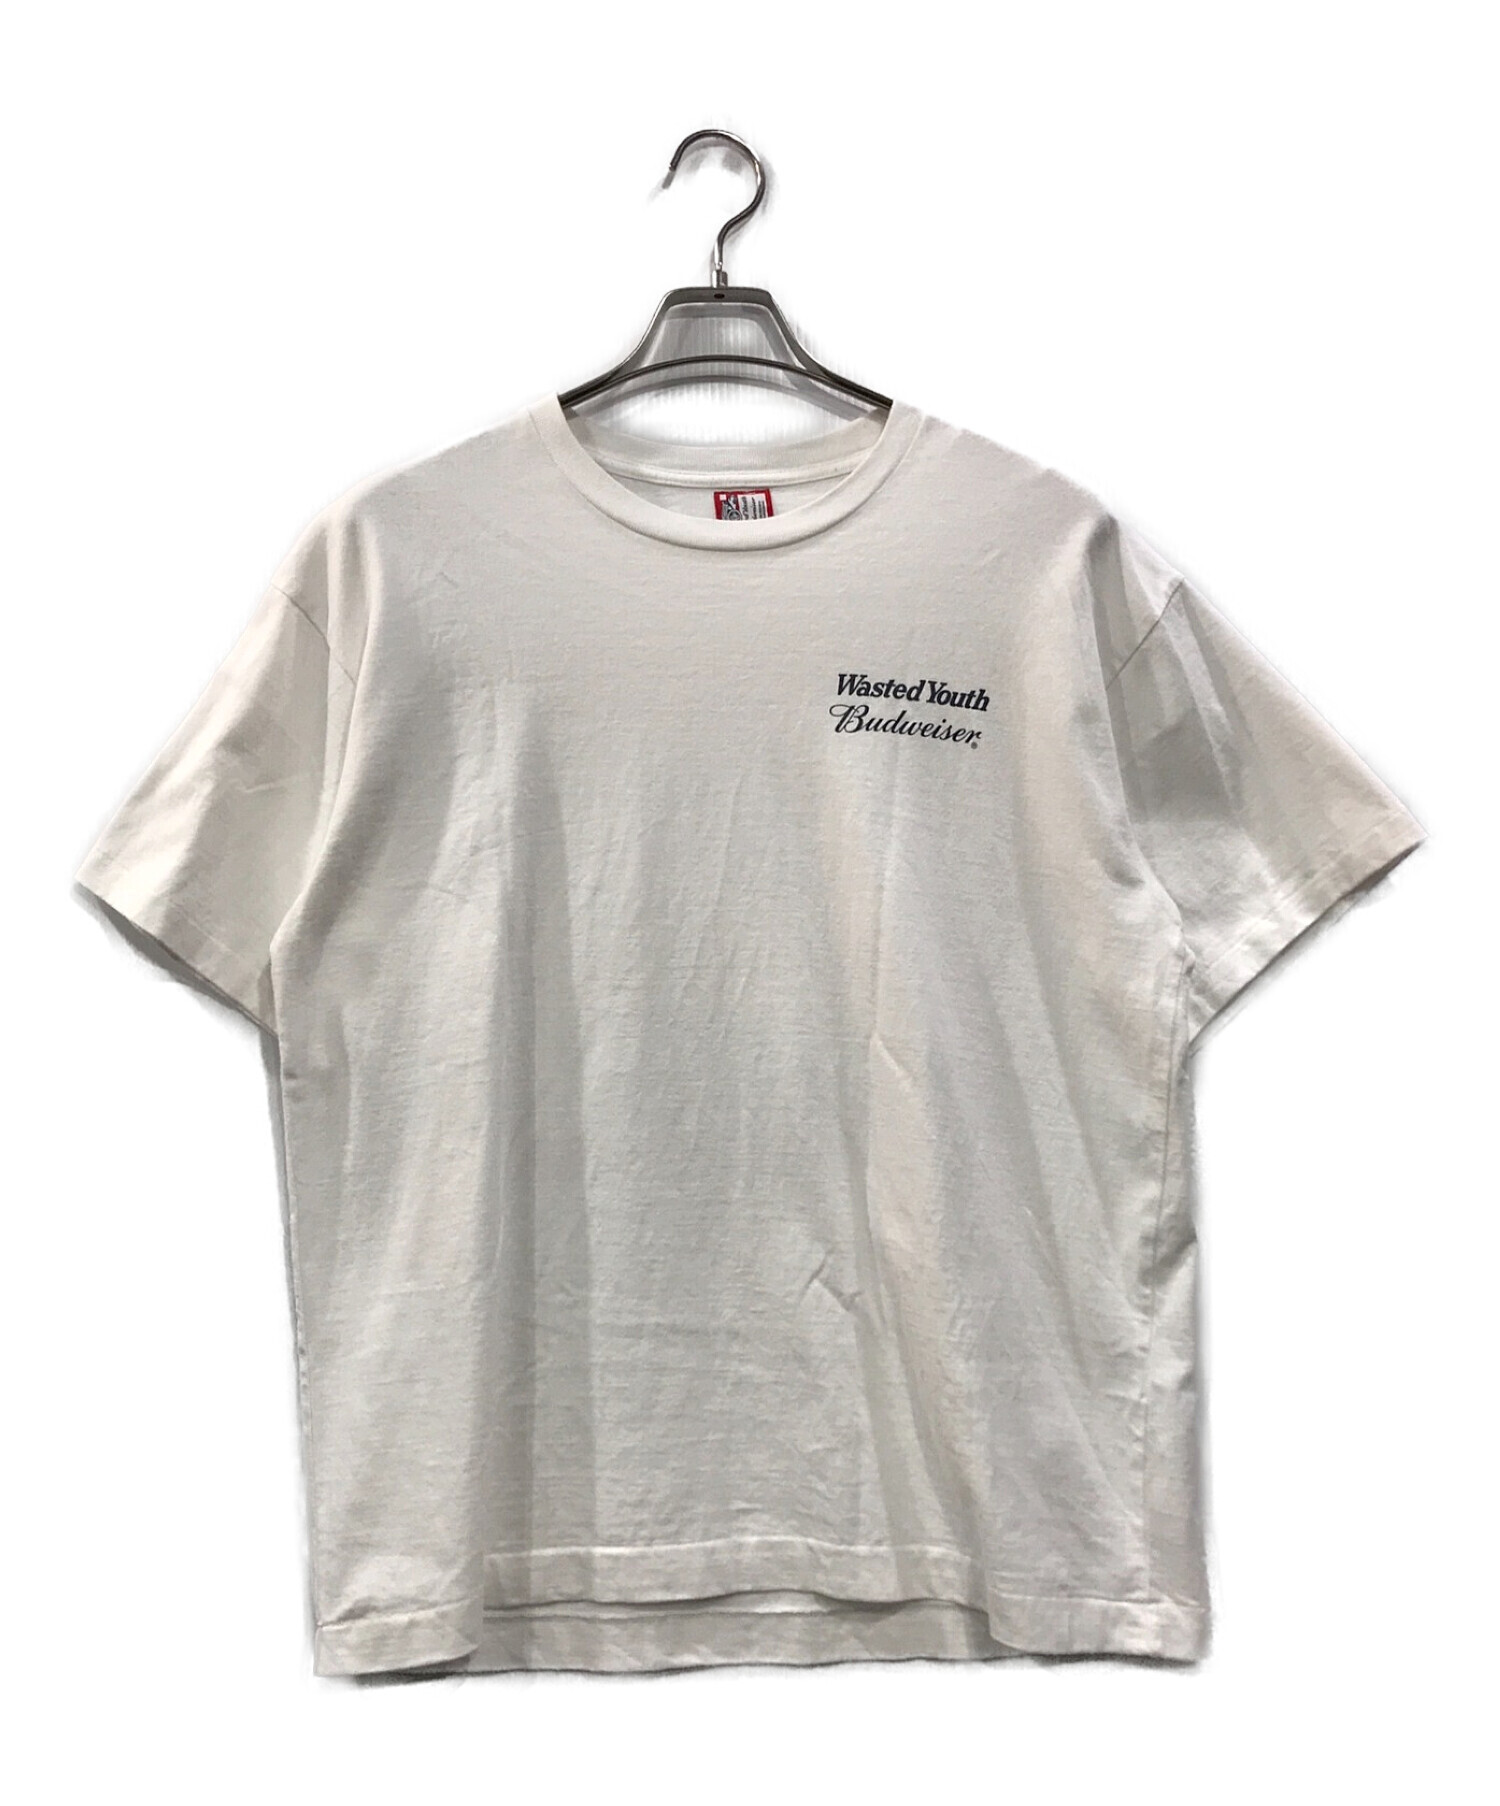 Wasted Youth × Budweiser Mサイズ white